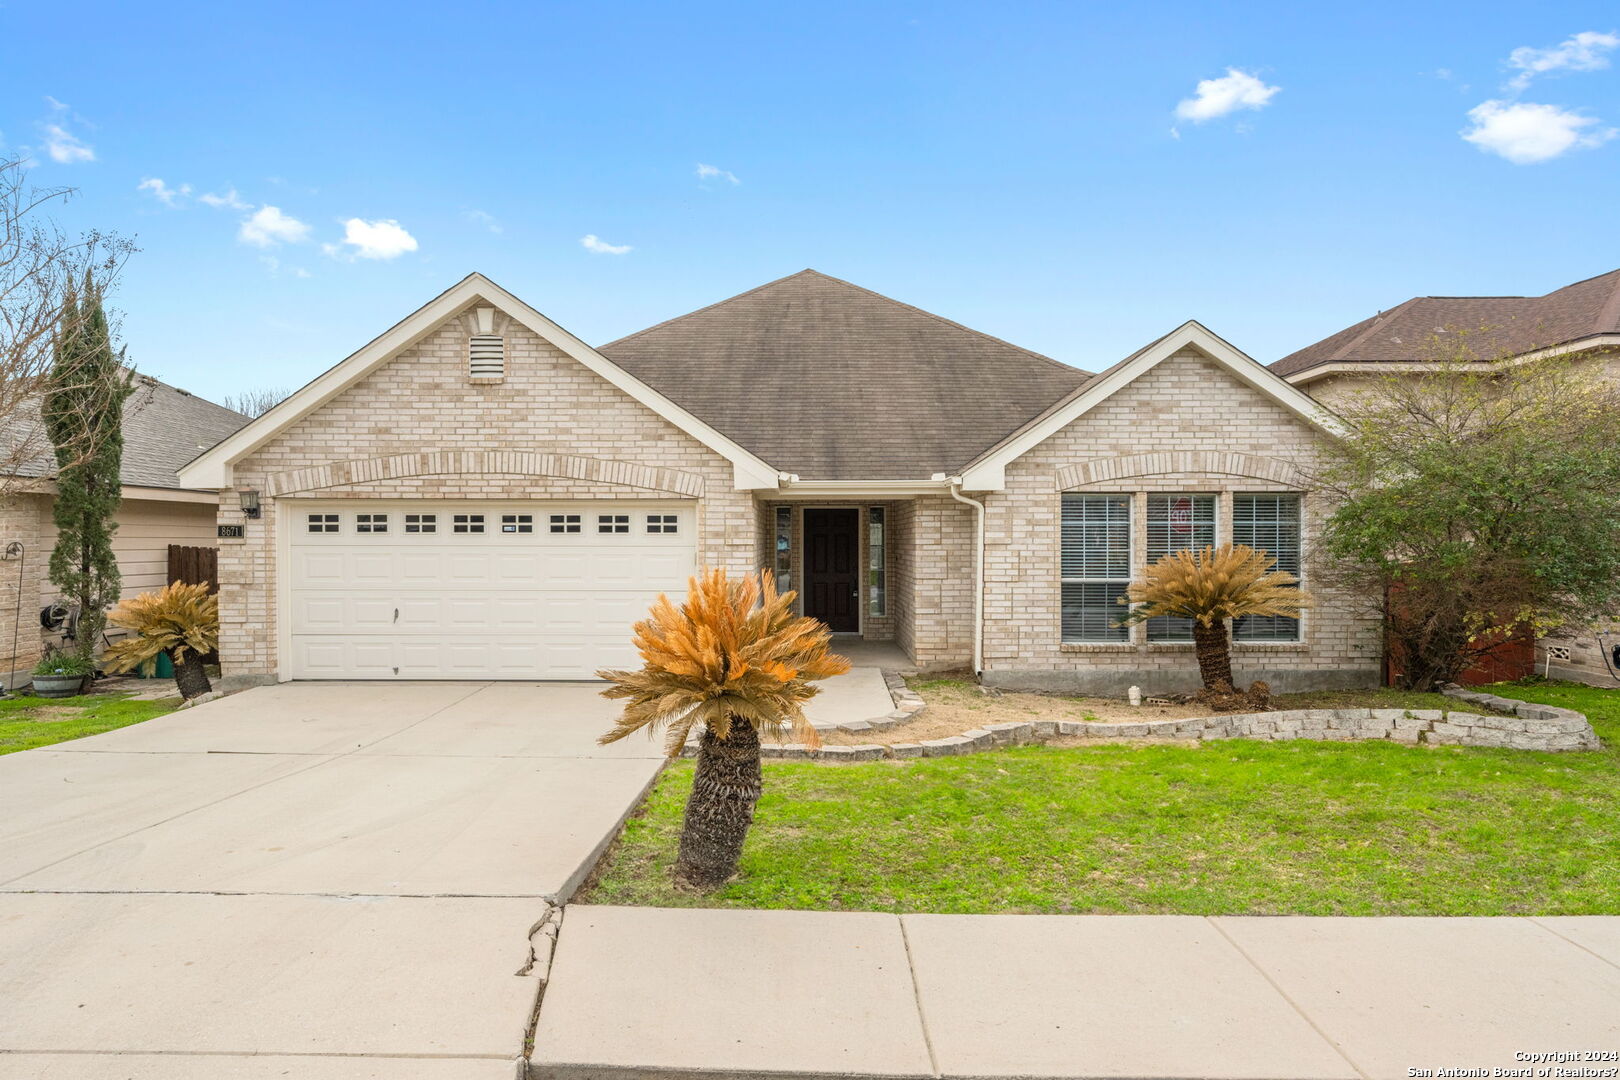 Photo of 8671 Gavel Dr in Converse, TX